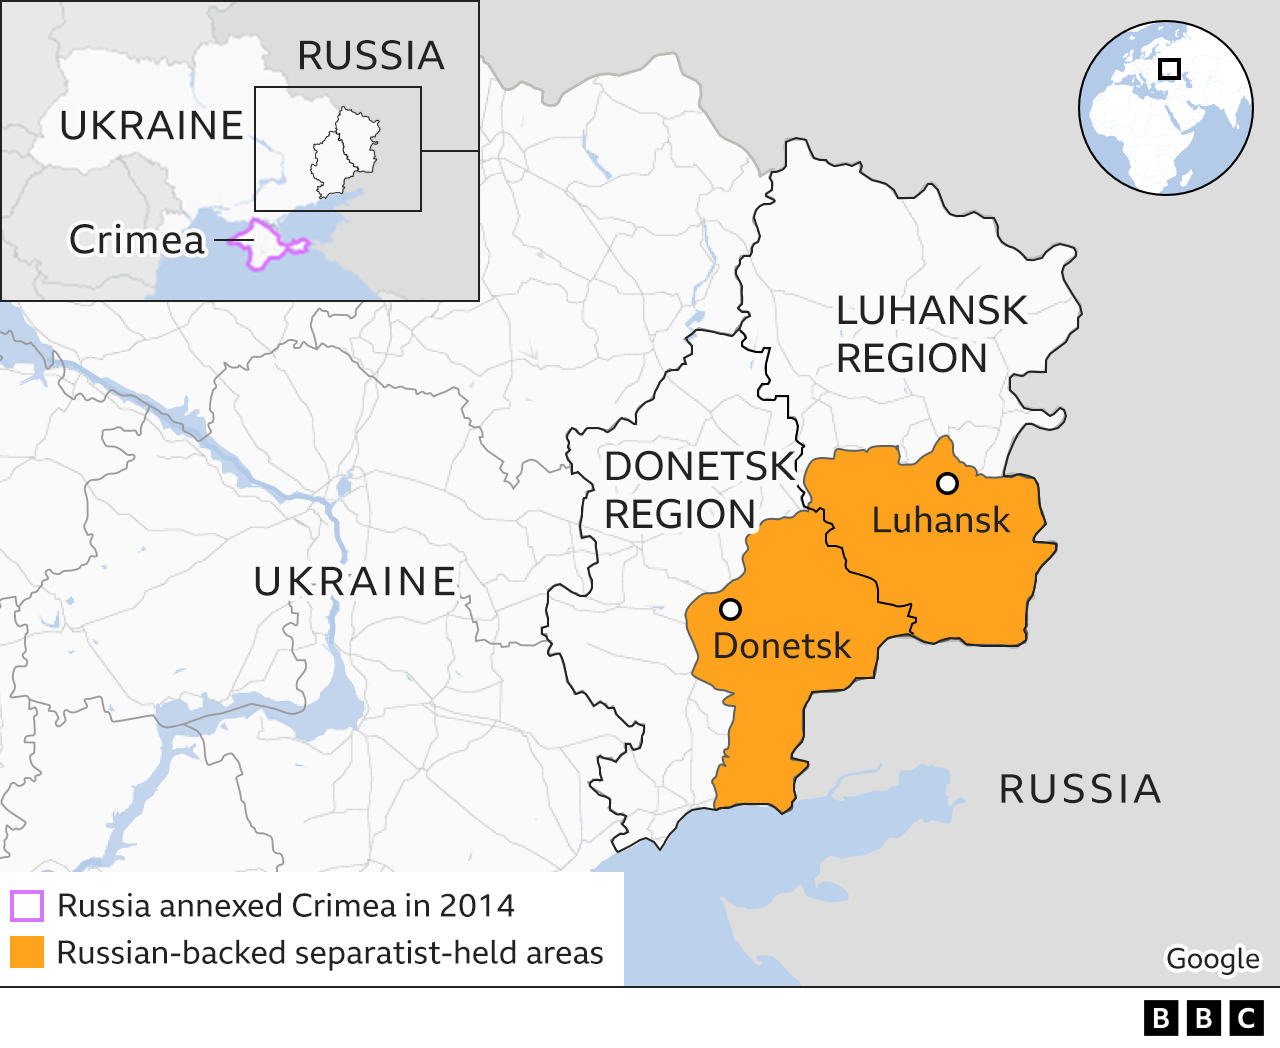 Map showing the Donetsk and Luhansk regions of eastern Ukraine and the Russian-backed separatist -held areas within those regions.